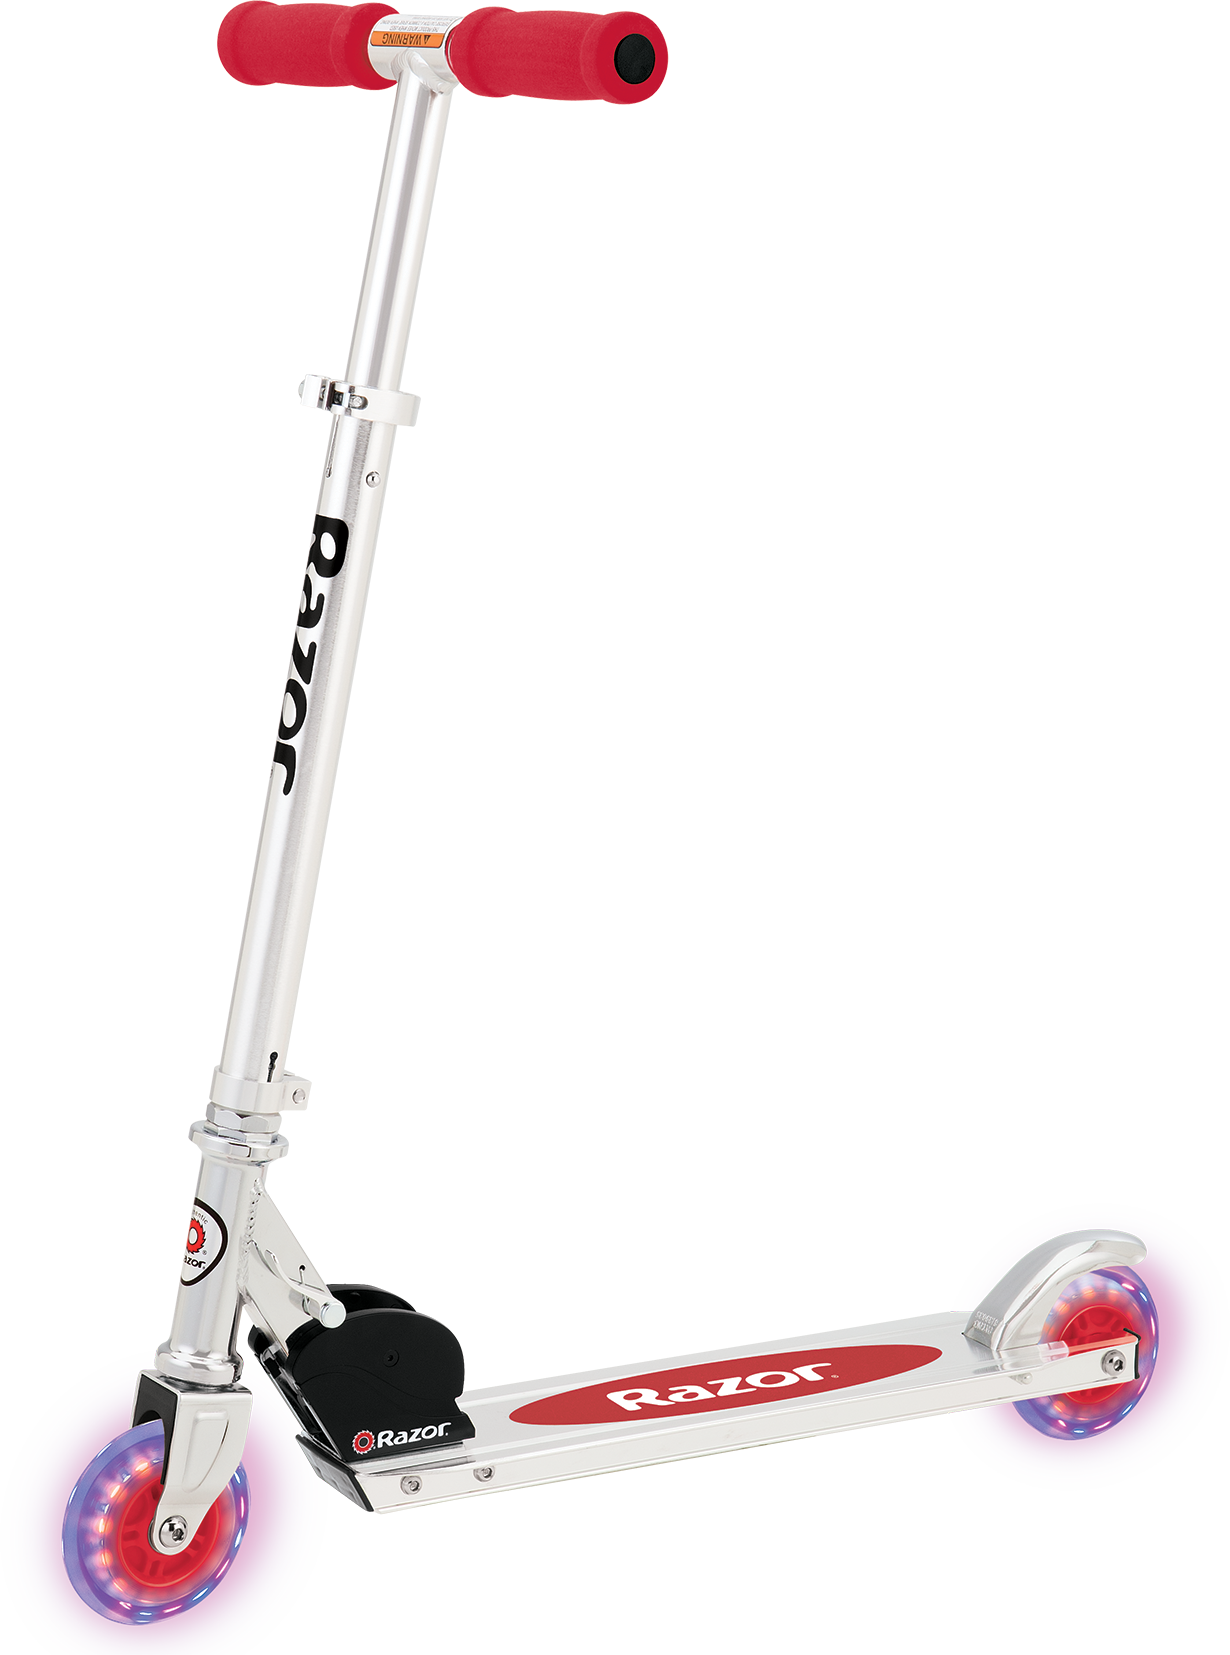 pink scooter with light up wheels